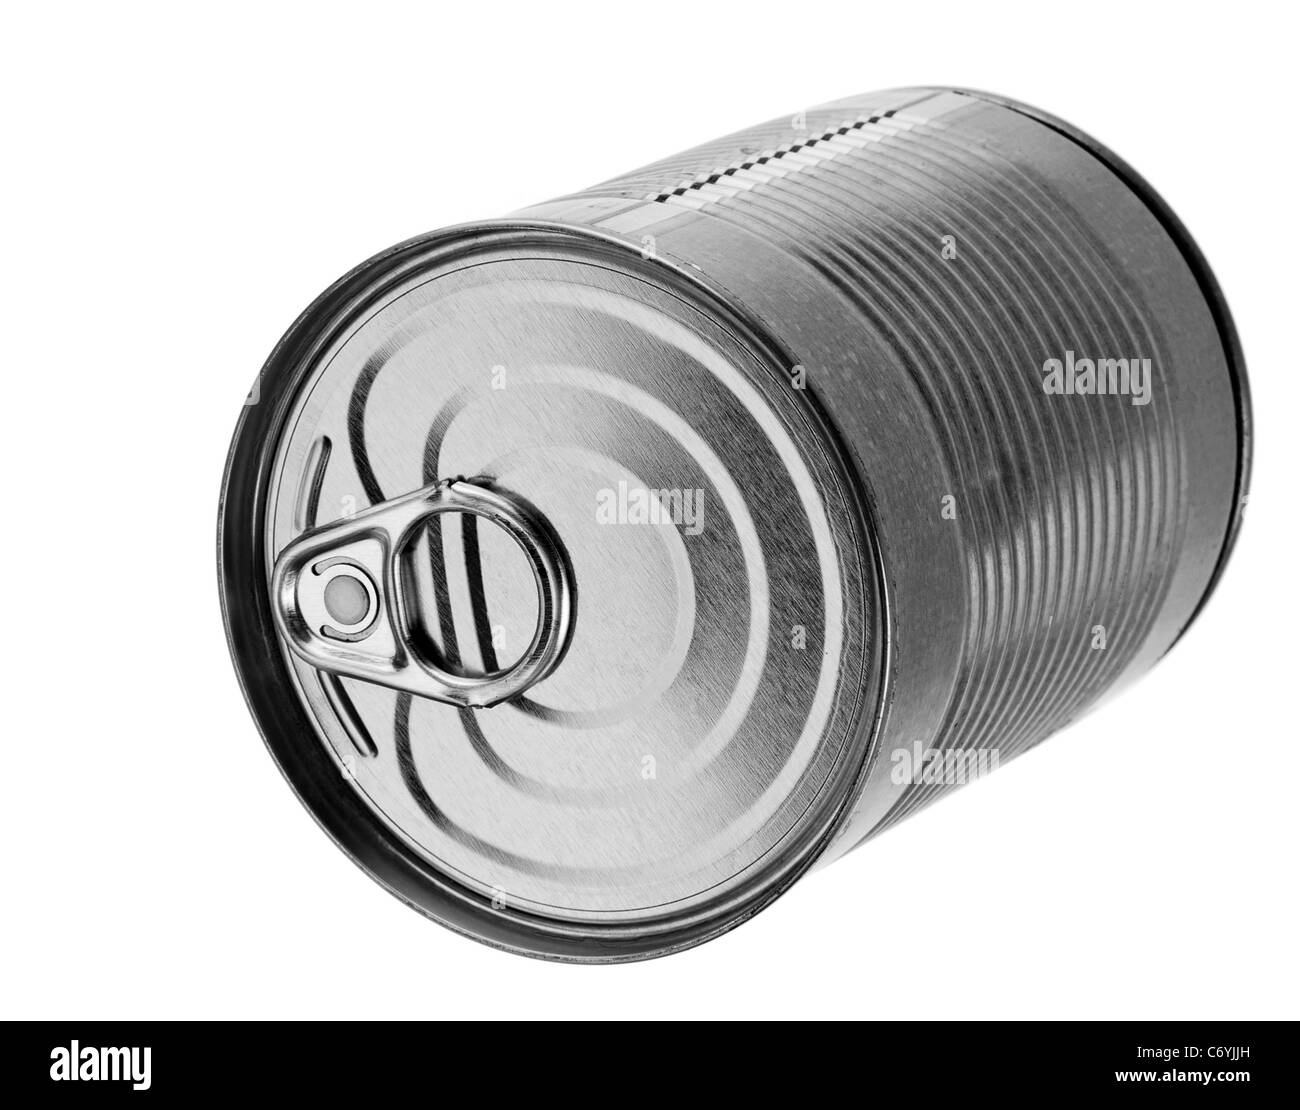 Metal can for presered food on white background Stock Photo